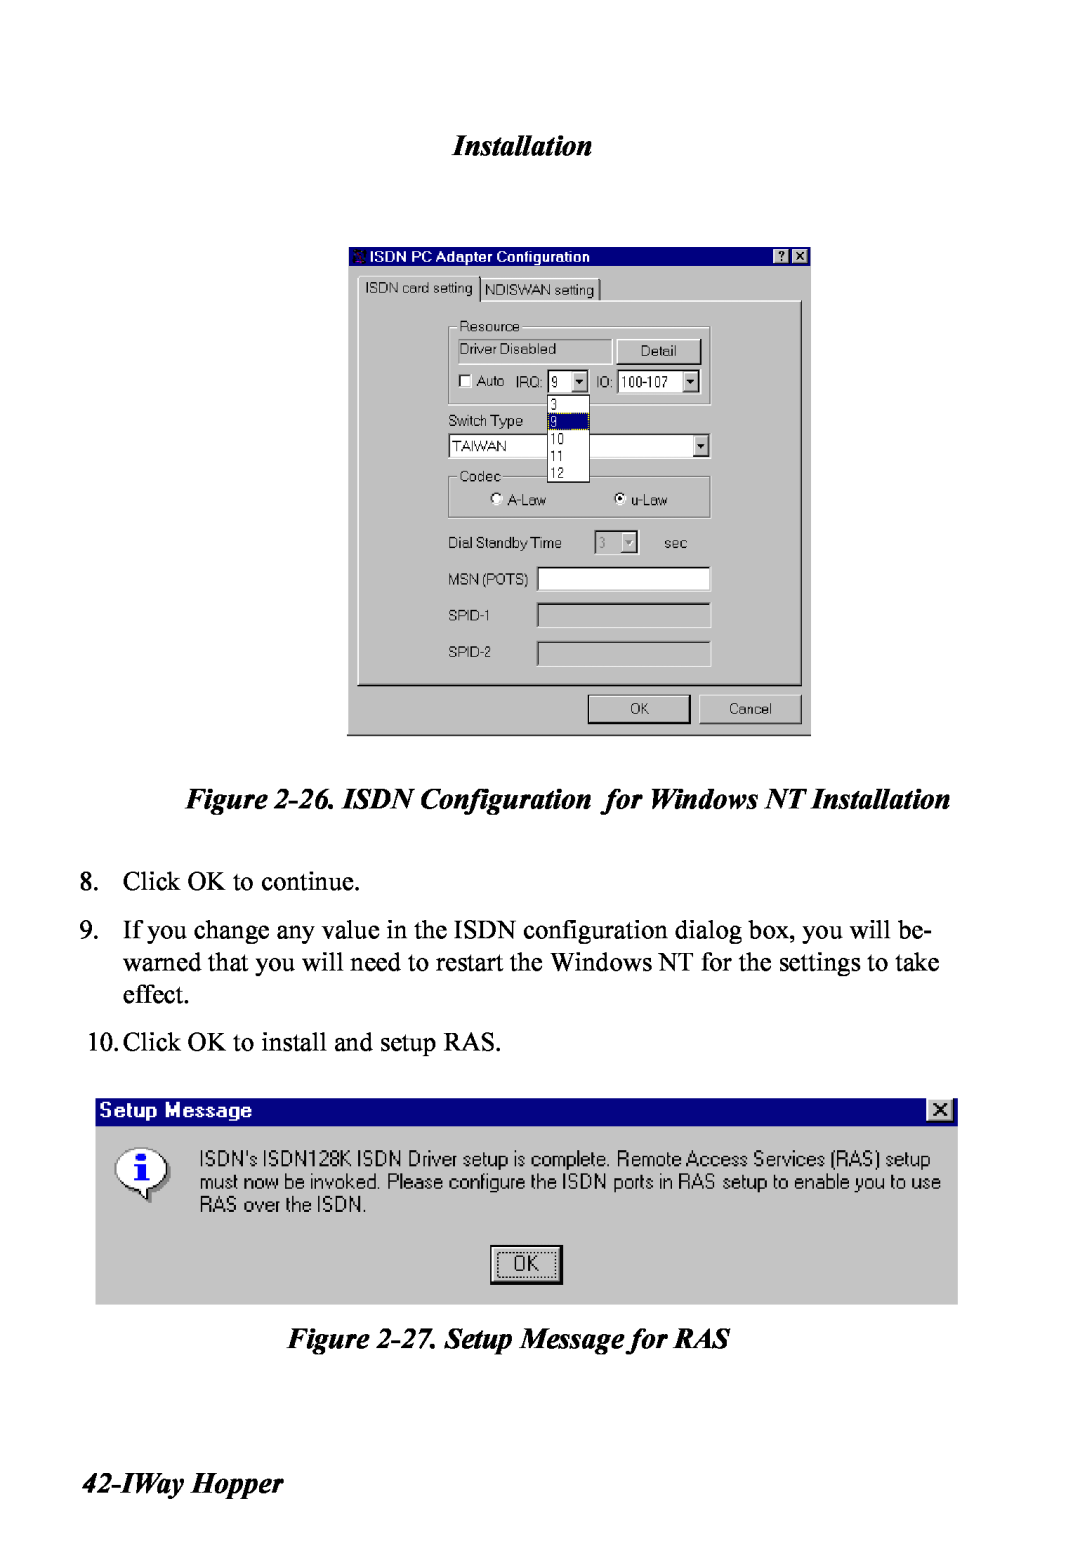 Multitech MT128ISA-UV manual 26. ISDN Configuration for Windows NT Installation, 27. Setup Message for RAS, IWay Hopper 